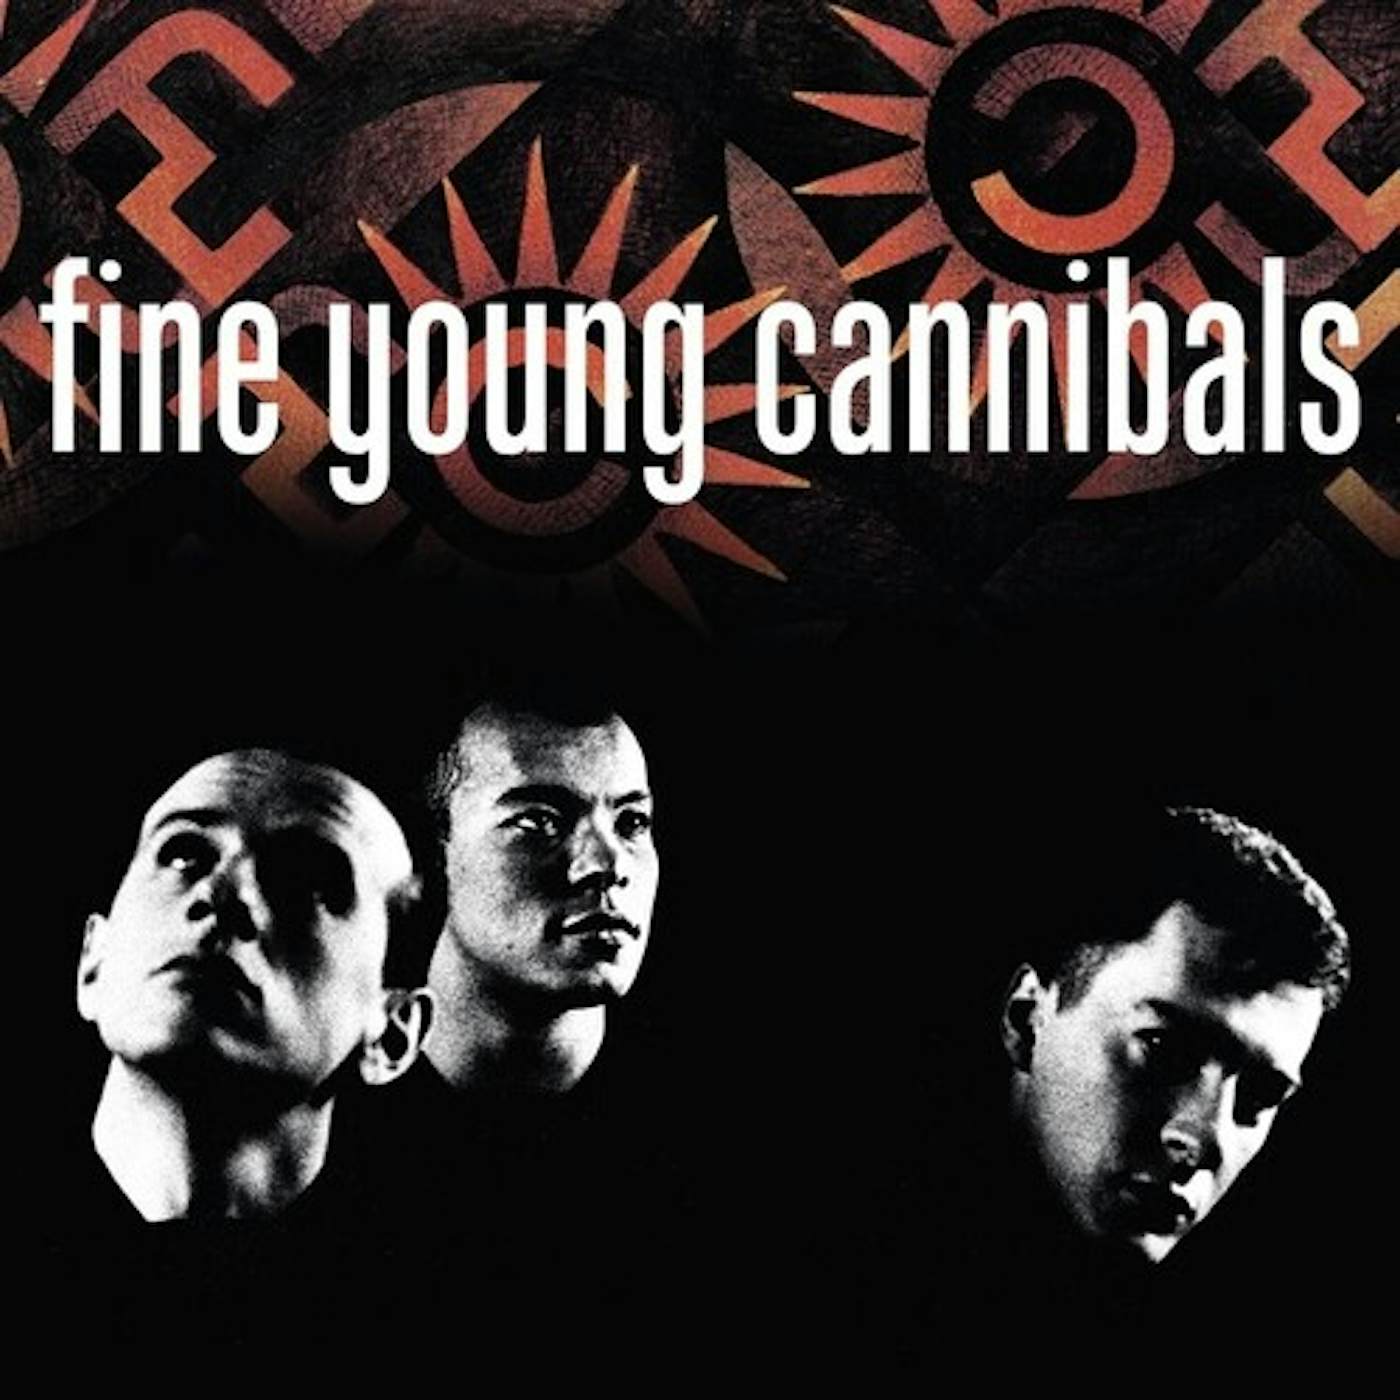 FINE YOUNG CANNIBALS (REMASTERED STANDARD EDITION) CD